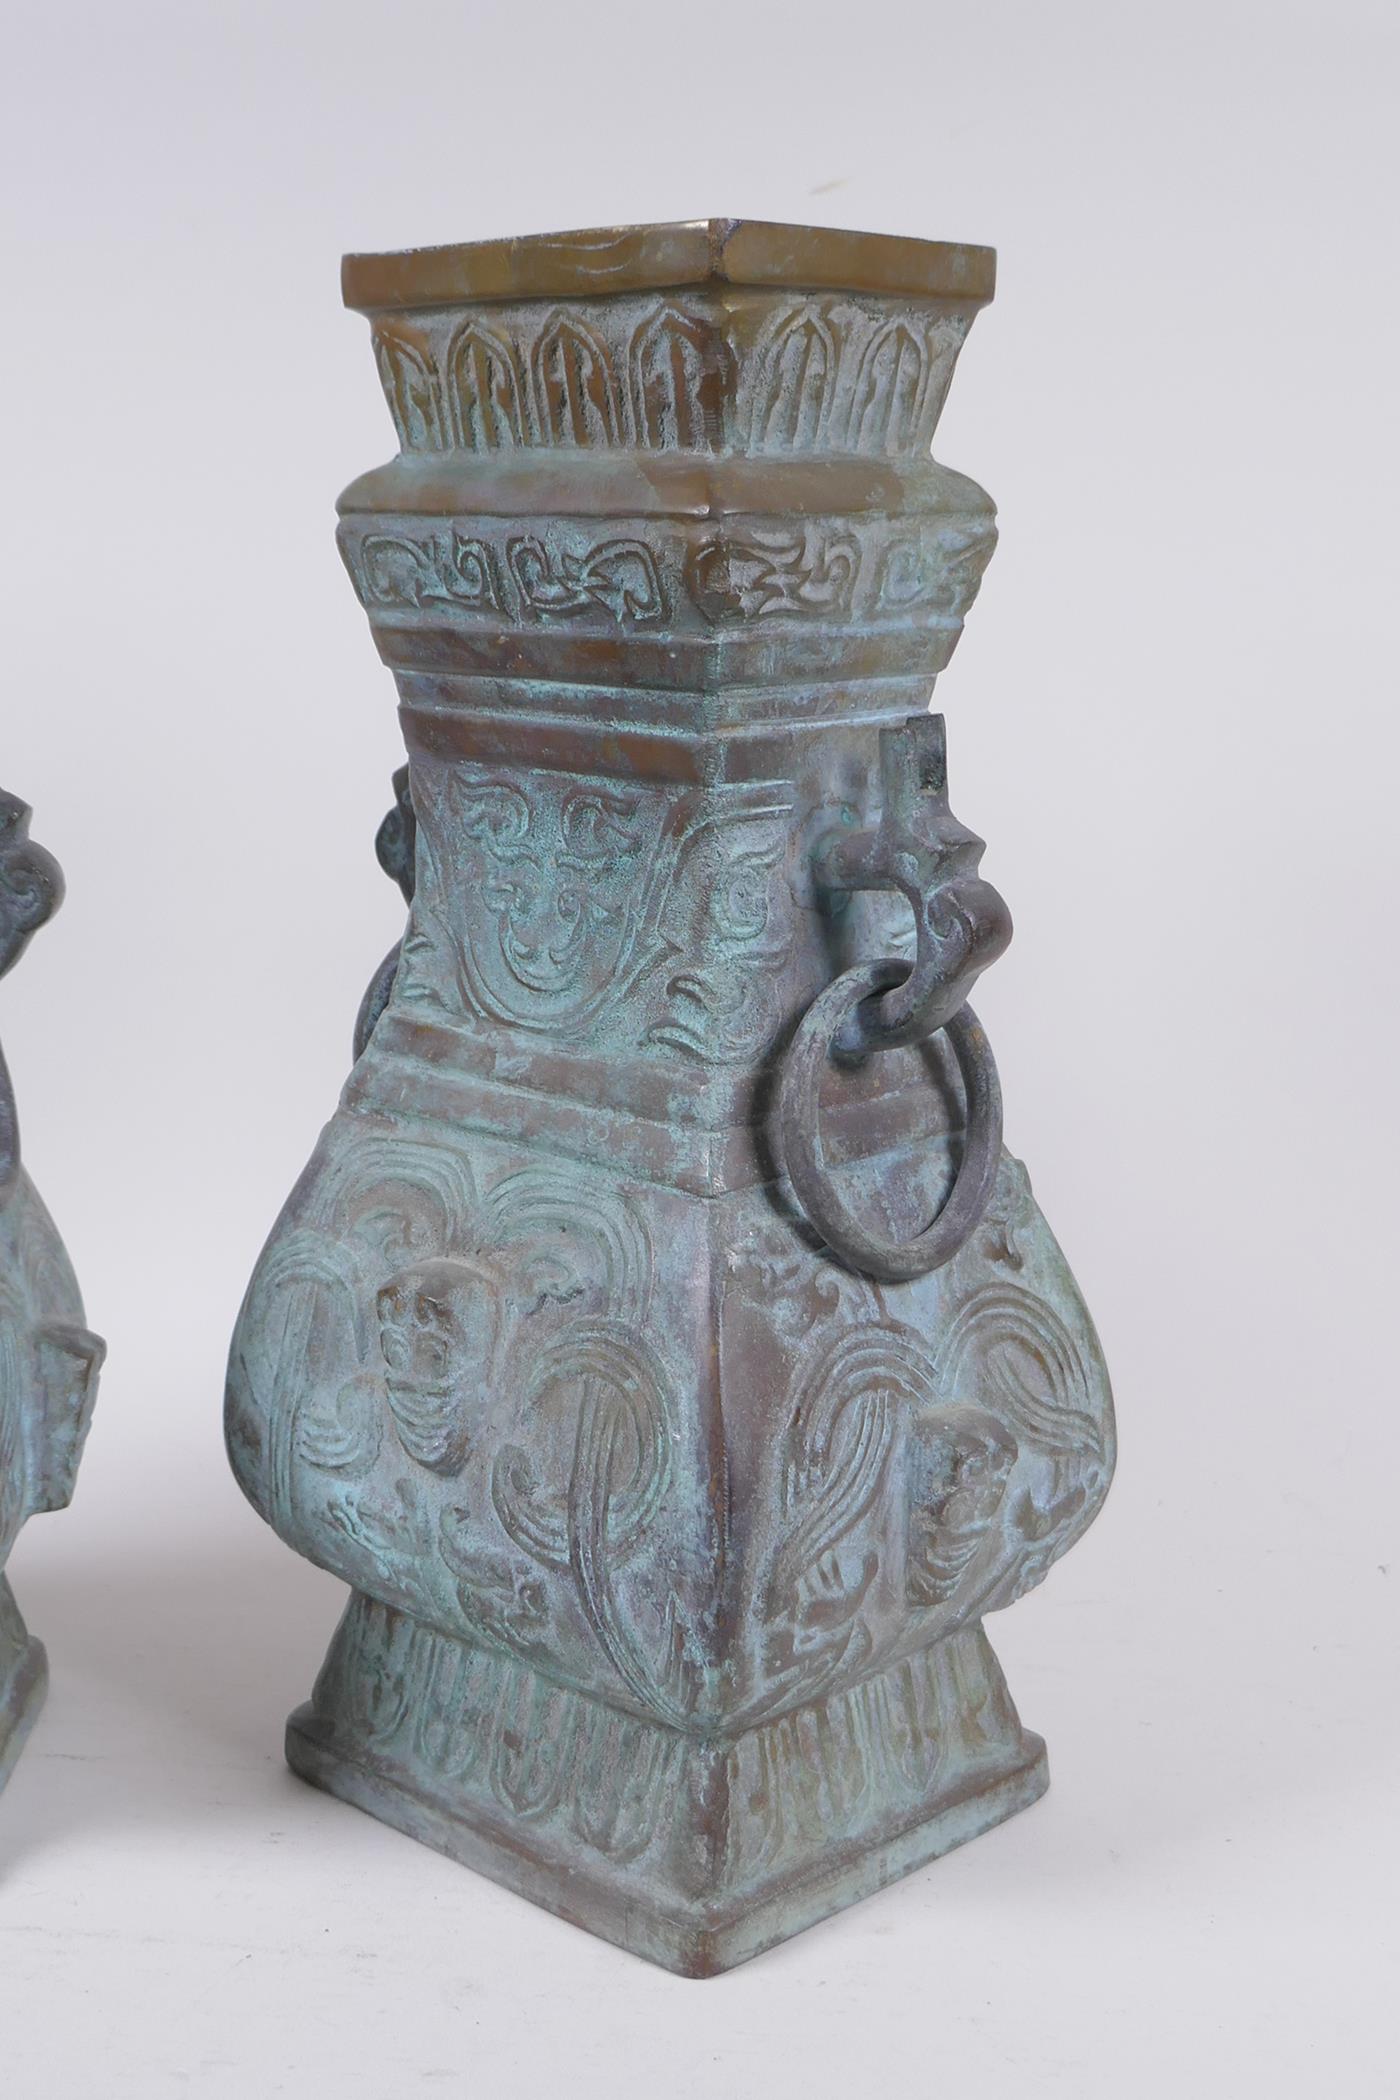 A pair of Chinese archaic style bronze vases with two dragon loop handles, lack bases, 32 cm high - Image 3 of 4